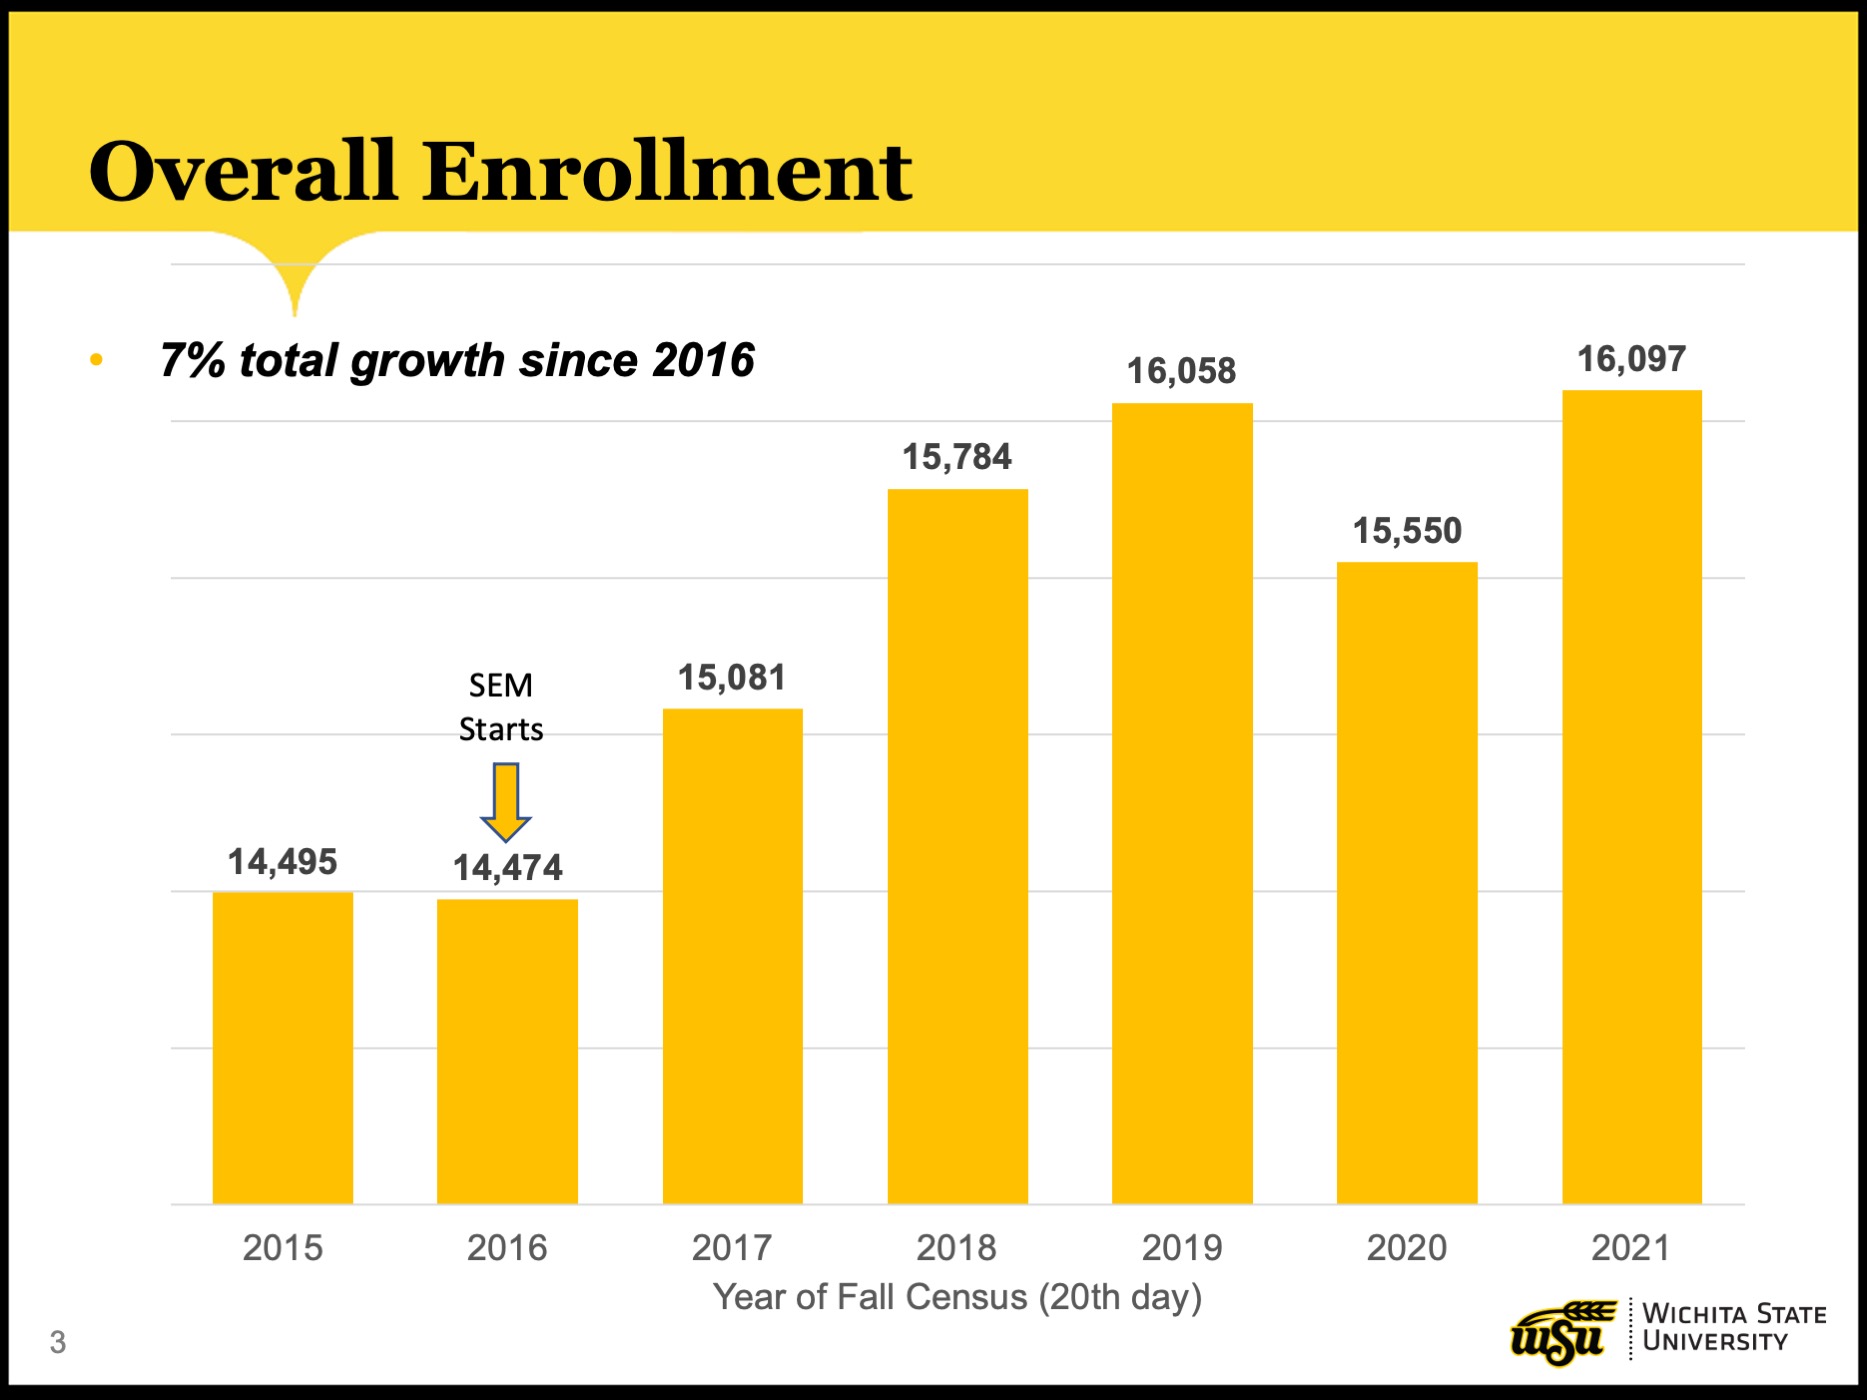 Bar chart showing the annual overall enrollment trend from 2015 to 2021. The chart notes that, while the data starts at 2015, SEM actually begins in 2016. Data was gathered from each year’s year of fall census, 20th day. Overall enrollment per year: 2015, 14,495; 2016 (when SEM starts), 14,474; 2017, 15,081; 2018, 15,784; 2019, 16,058; 2020, 15,550; and 2021, 16,097. Data equals an overall enrollment growth of the period of seven percent since 2016. 